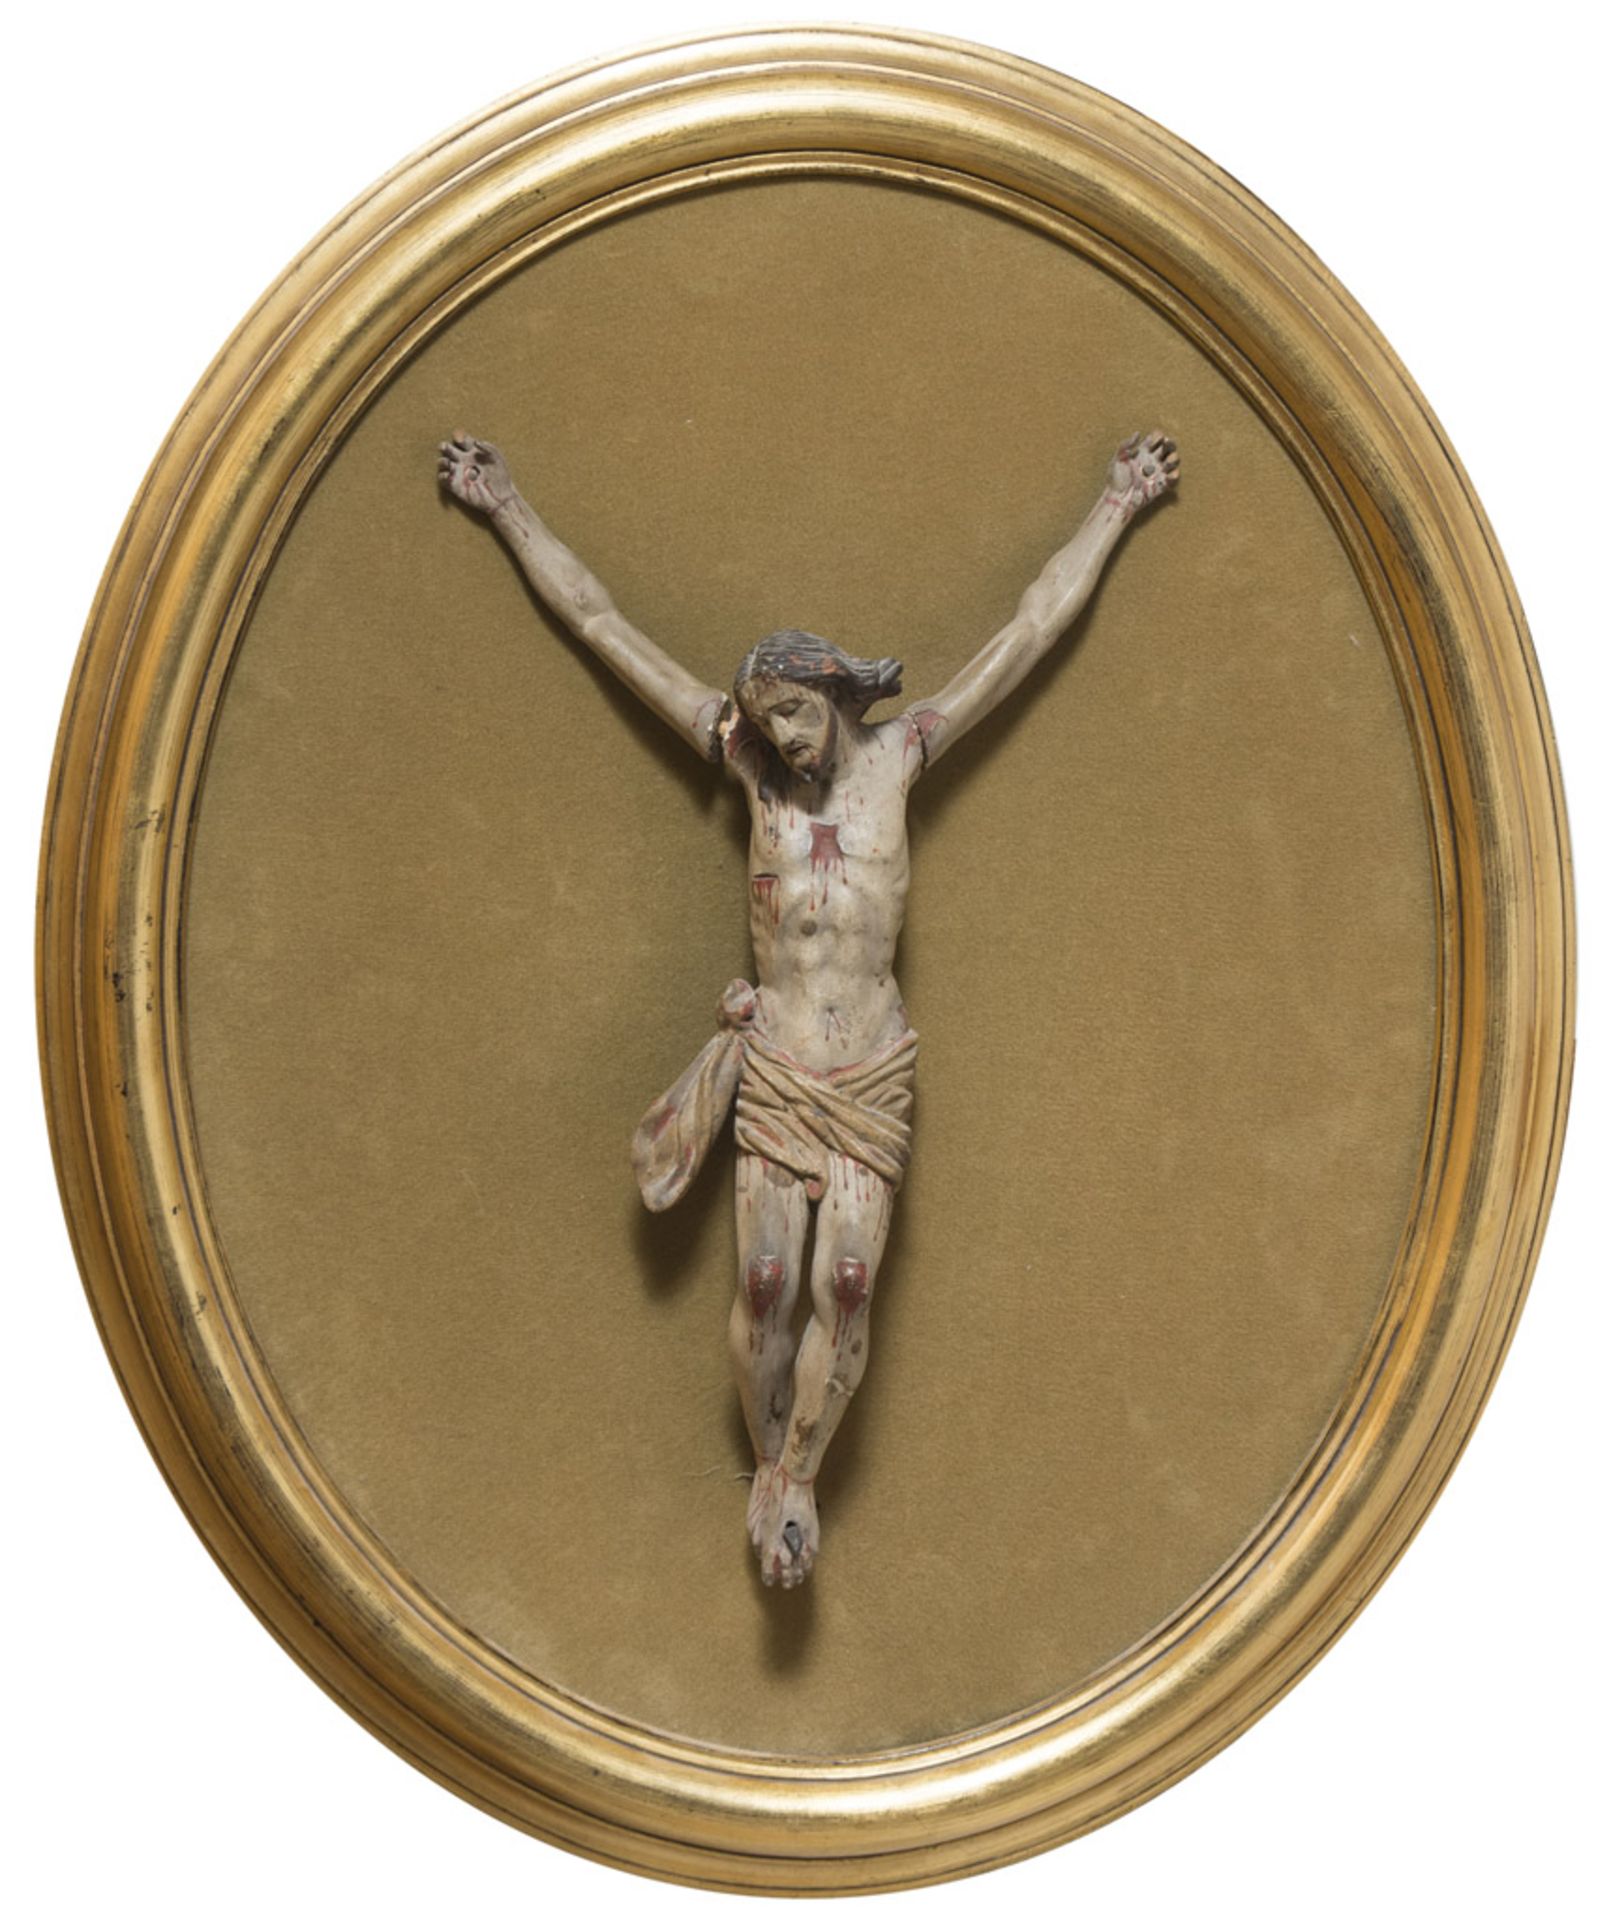 SCULPTURE OF CHRIST IN LACQUERED WOOD, PROBABLY SPAIN LATE 18TH CENTURY with mobile arms, support of